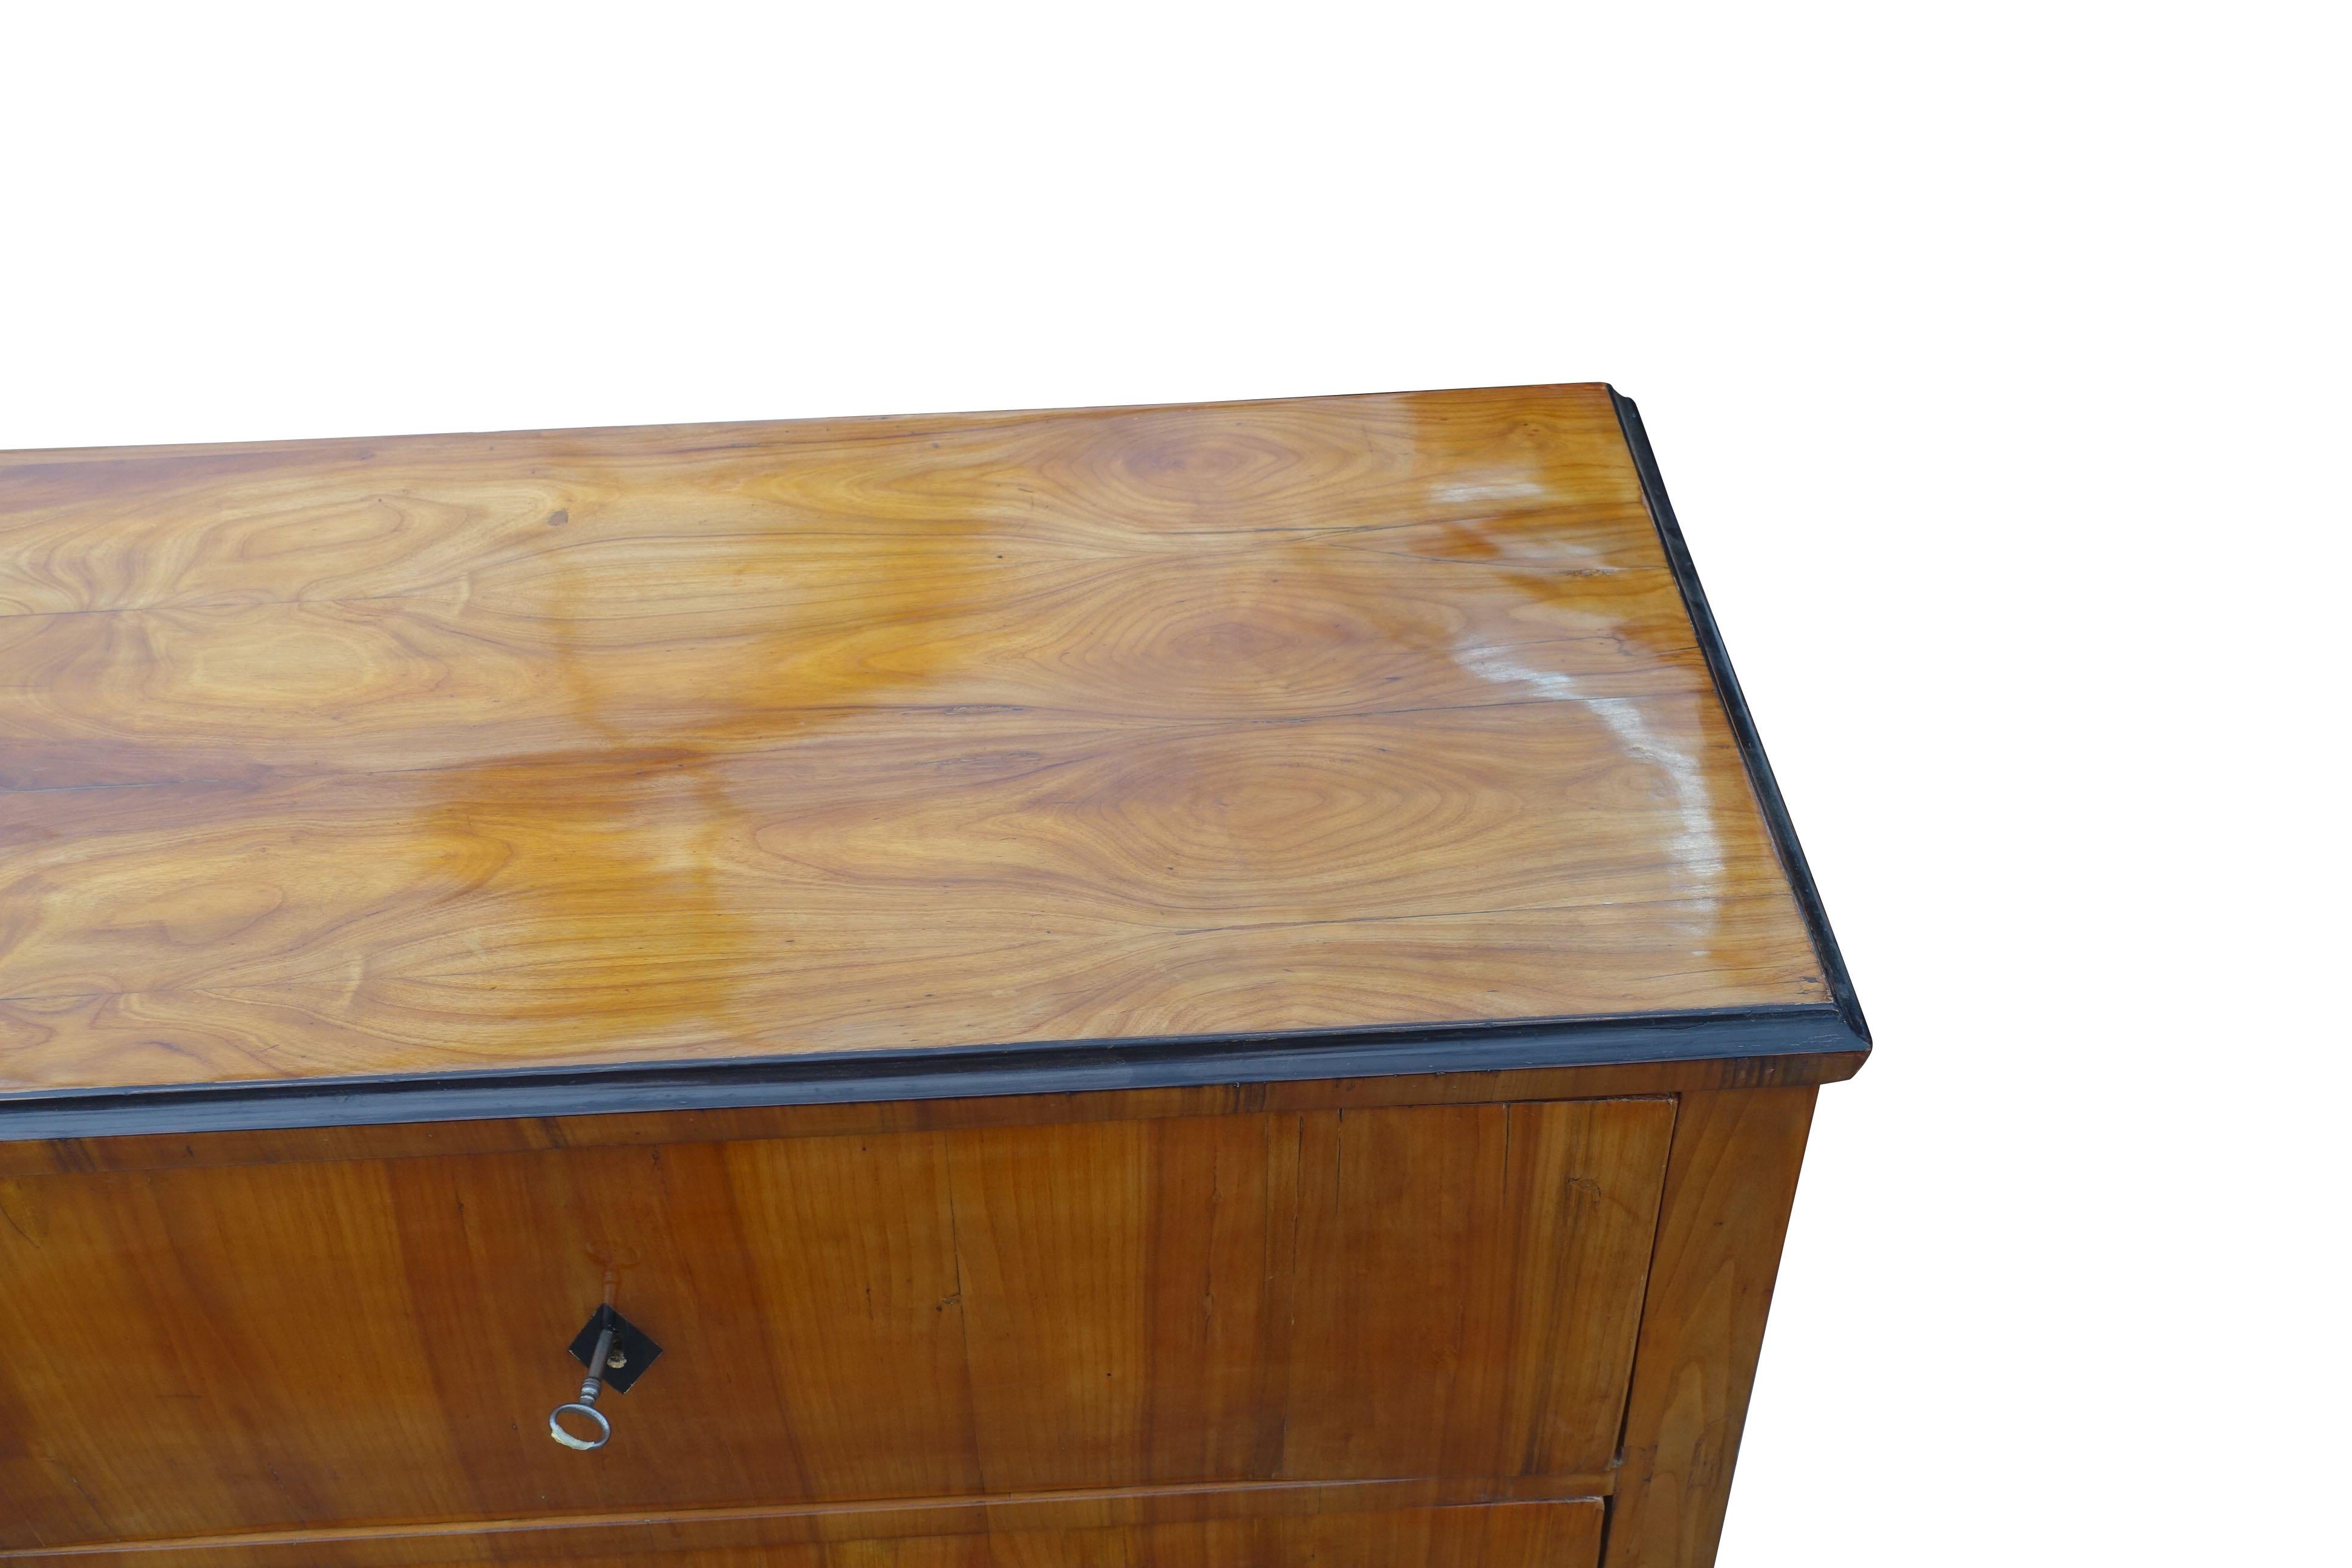 19th century highly polished sycamore two-drawer commode.
Ebonized diamond design key surround.
Beautifully polished to accentuate wood grain design.
 